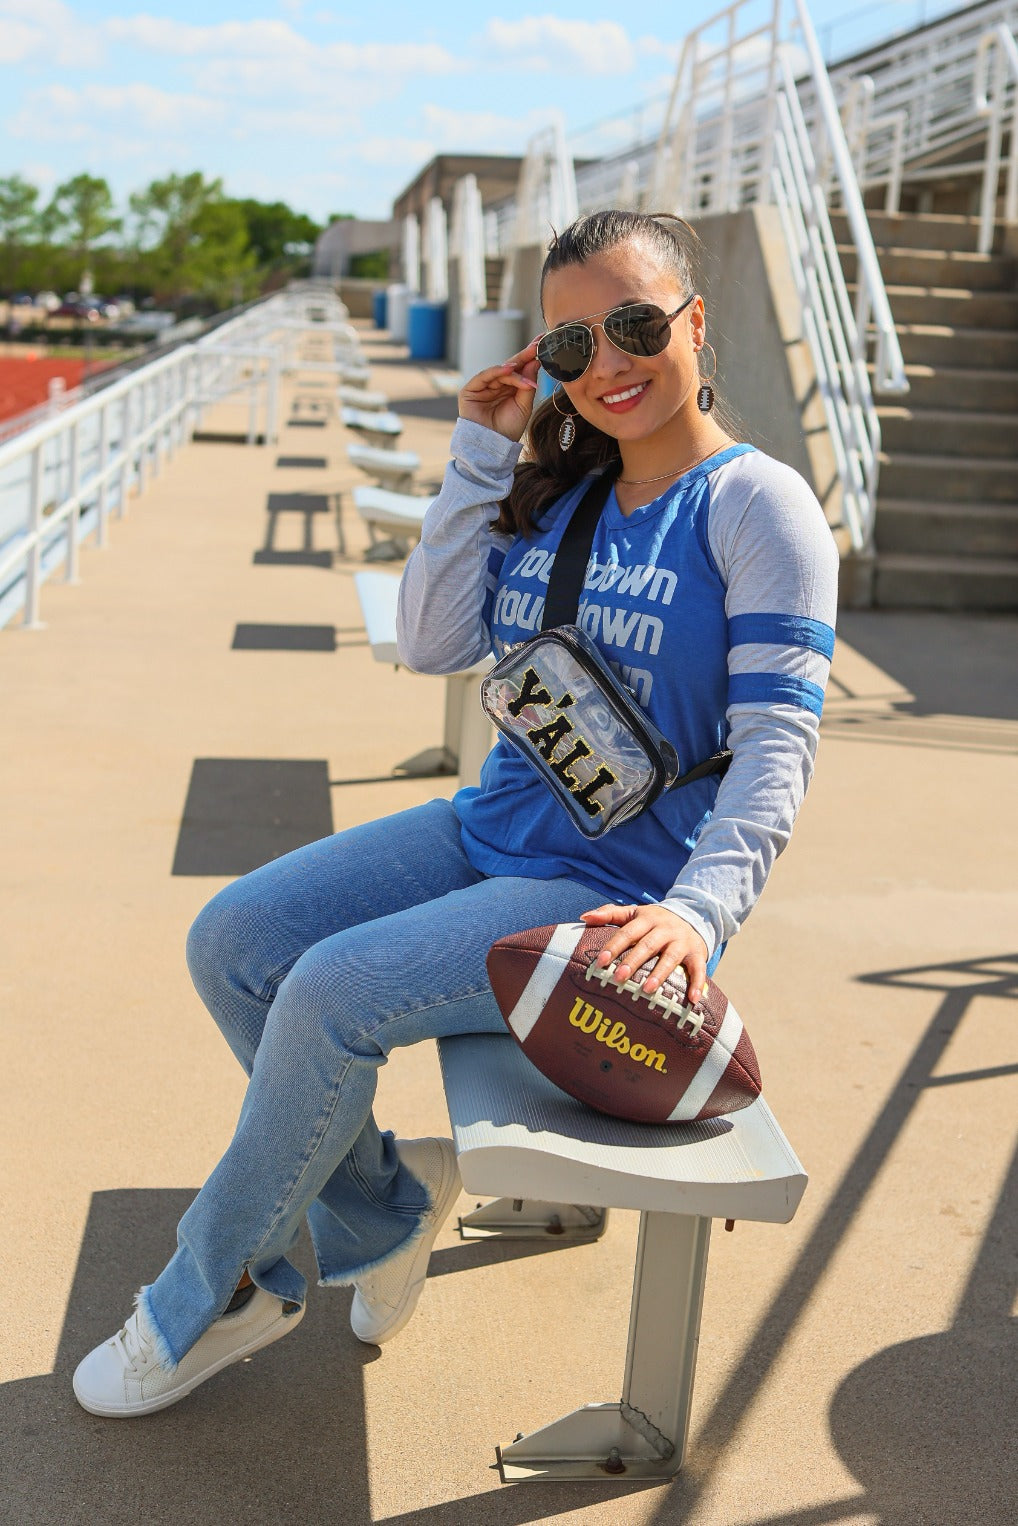 Touchdown Touchdown Touchdown on Royal Blue Longsleeve Tee with Grey Sleeves & Varsity Stripe